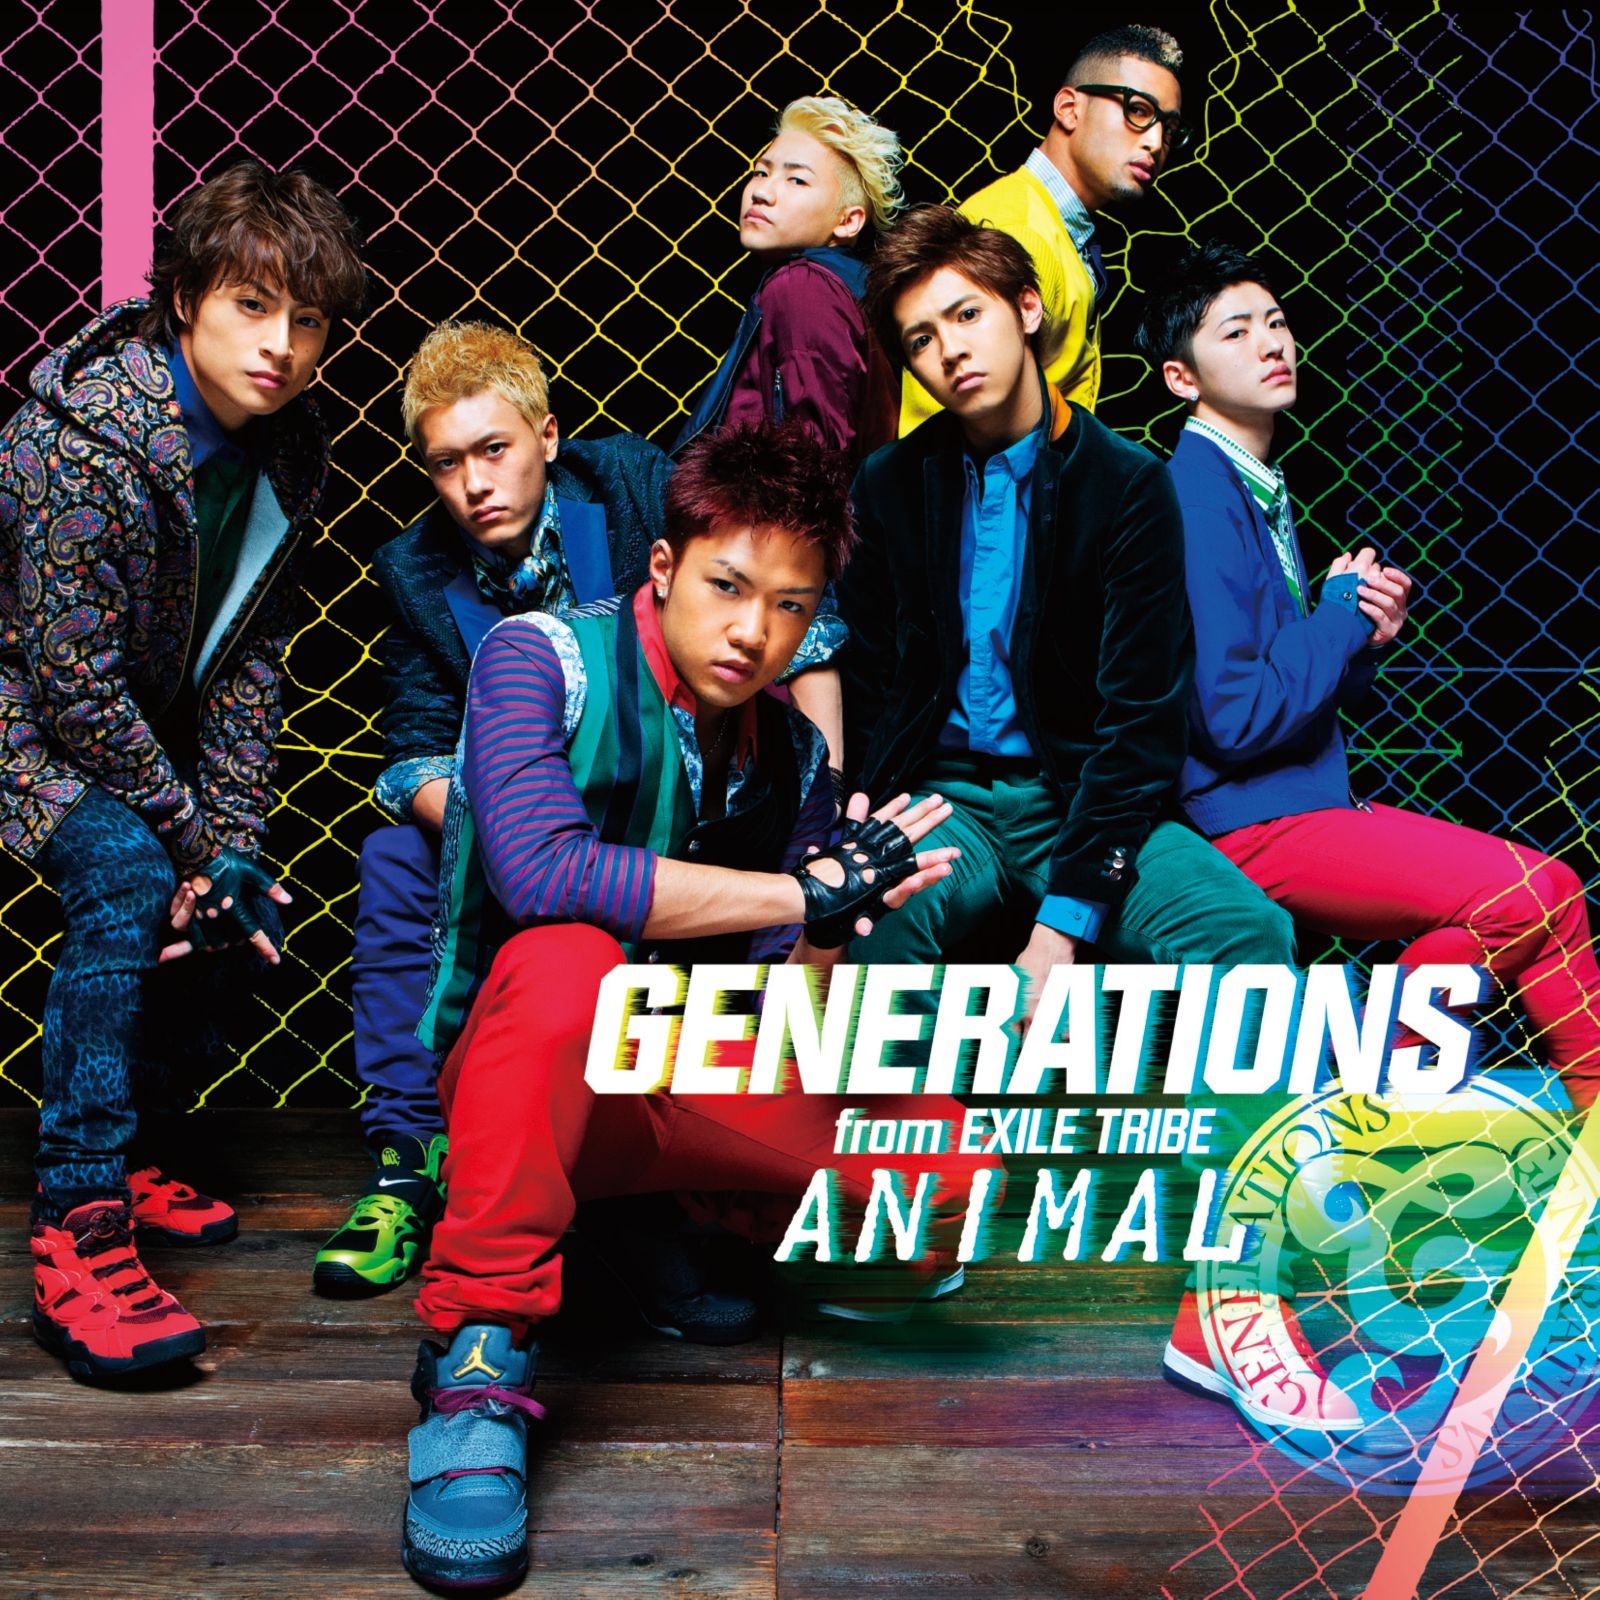 Animal(GENERATIONS from EXILE TRIBE演唱歌曲)